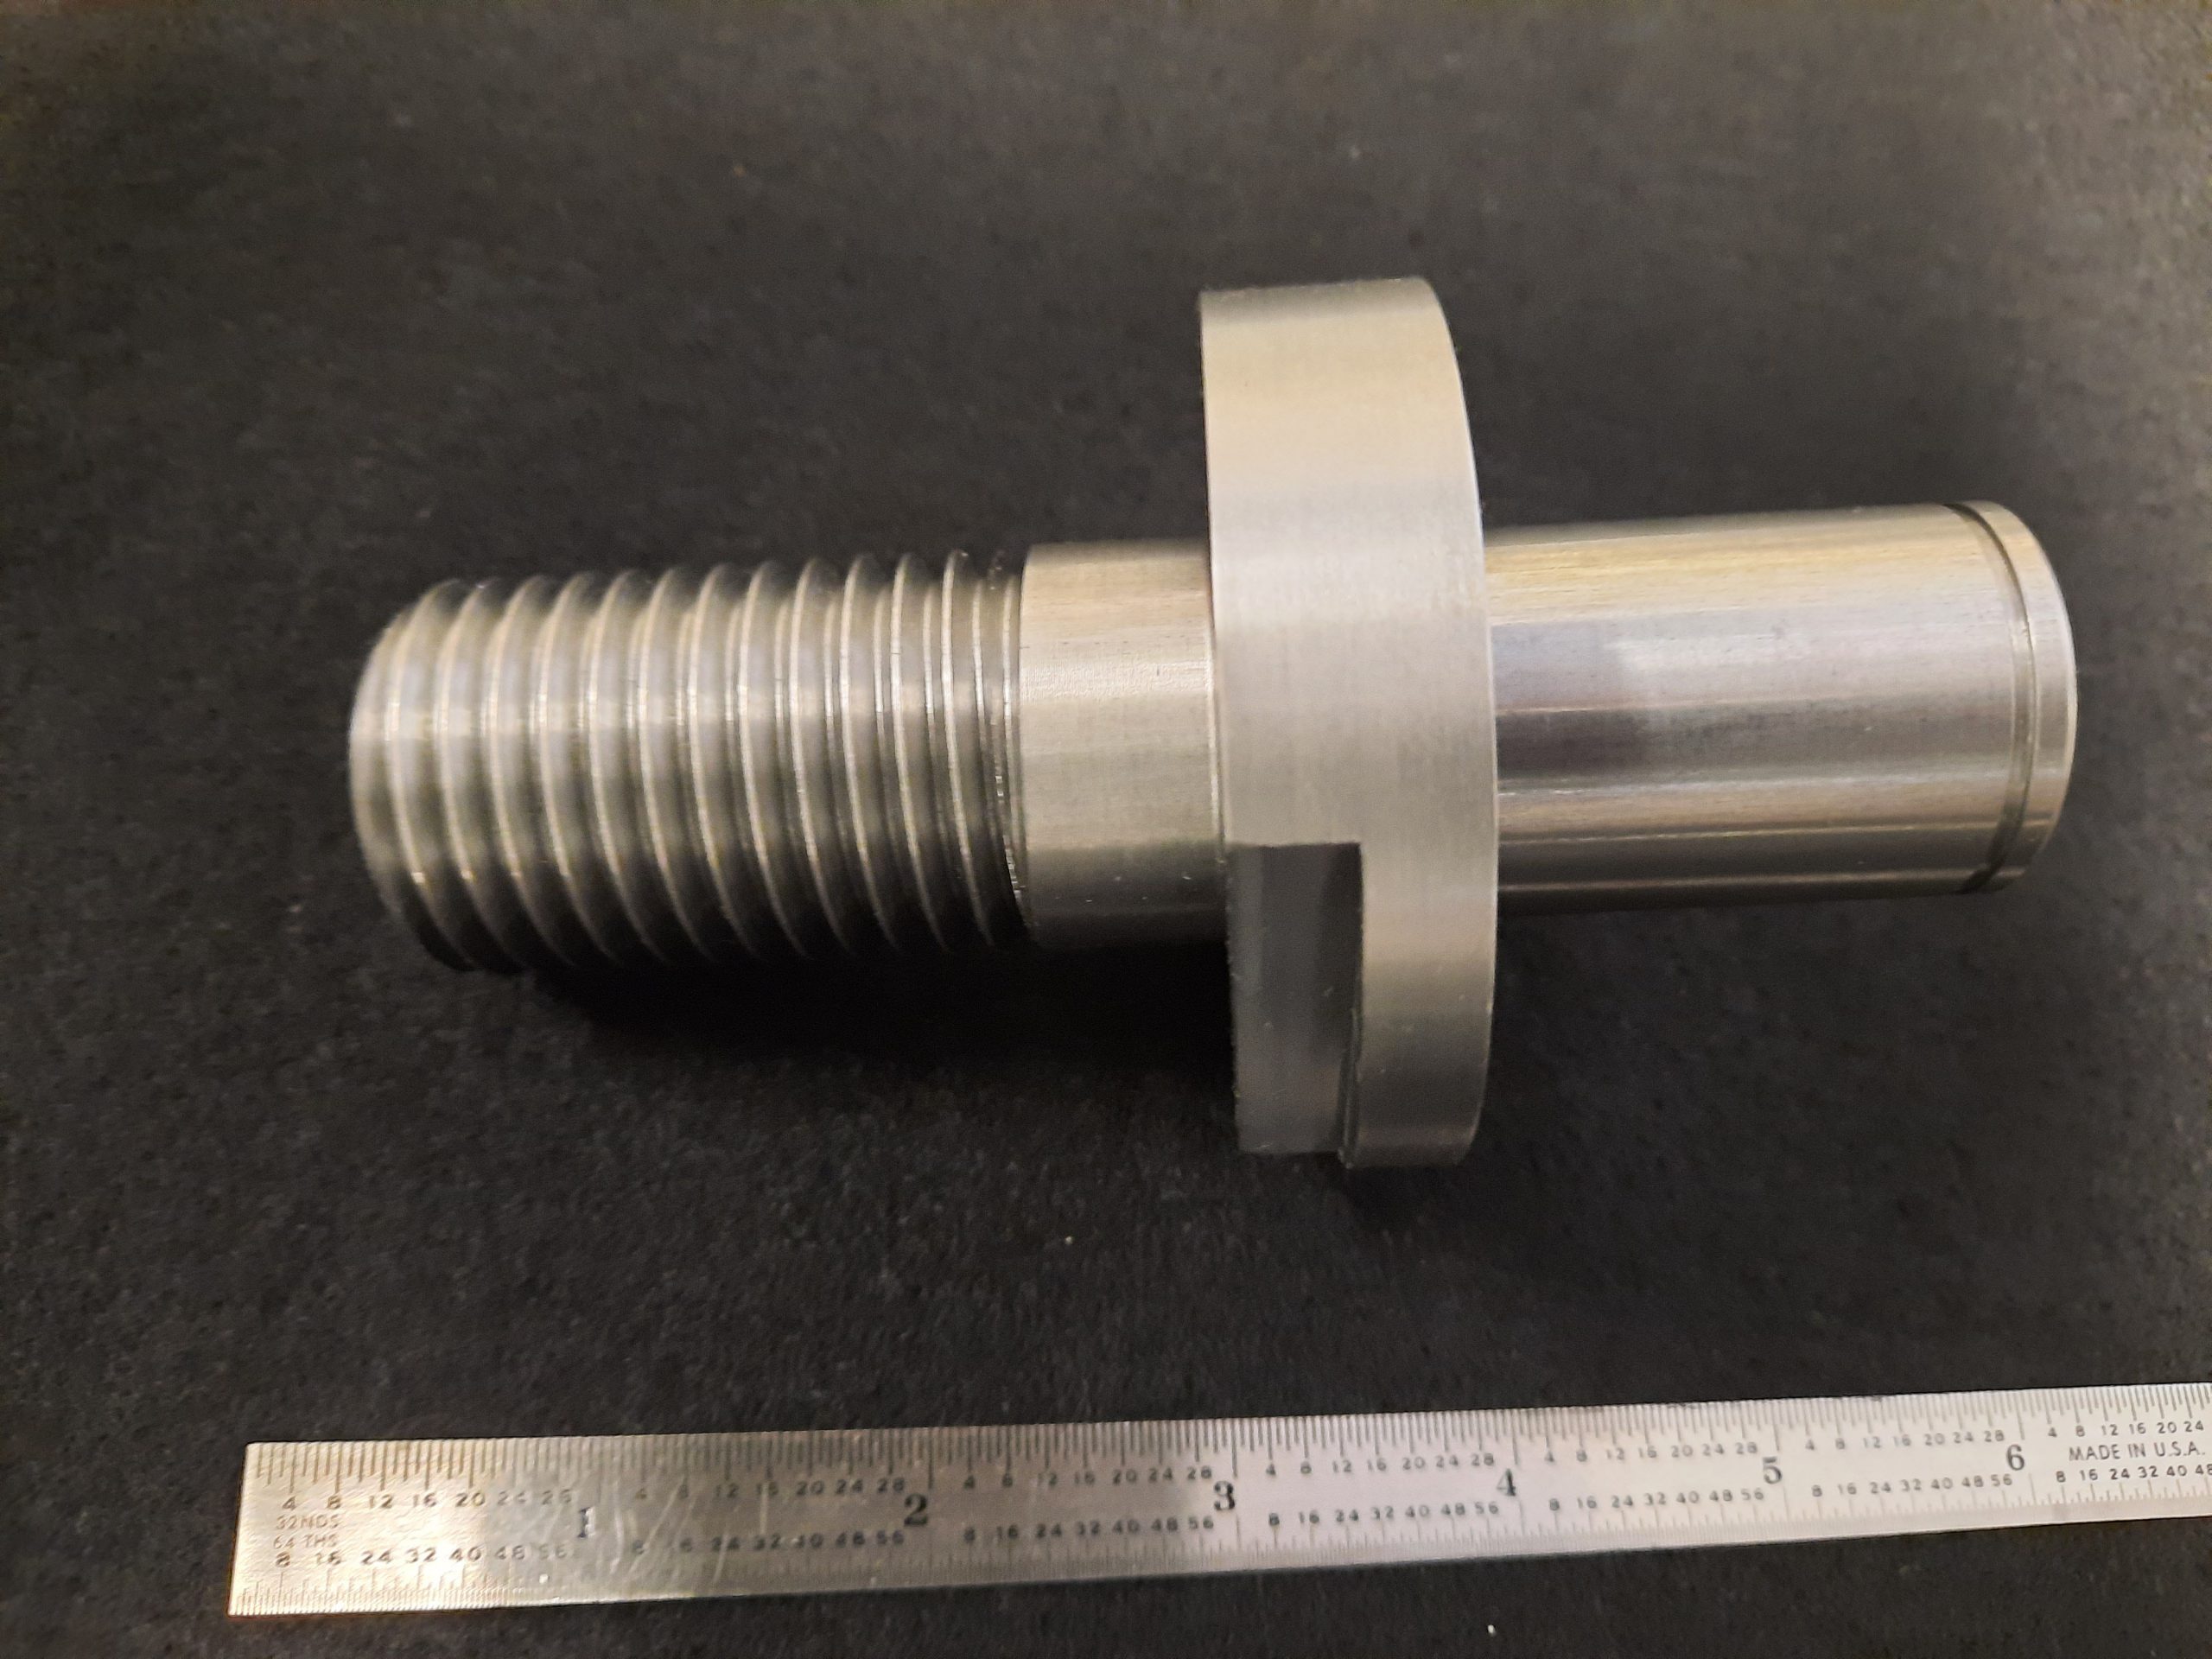 This part been turned and threaded on CNC Lathe Machine. The flat on the part was milled on the cnc milling machine.